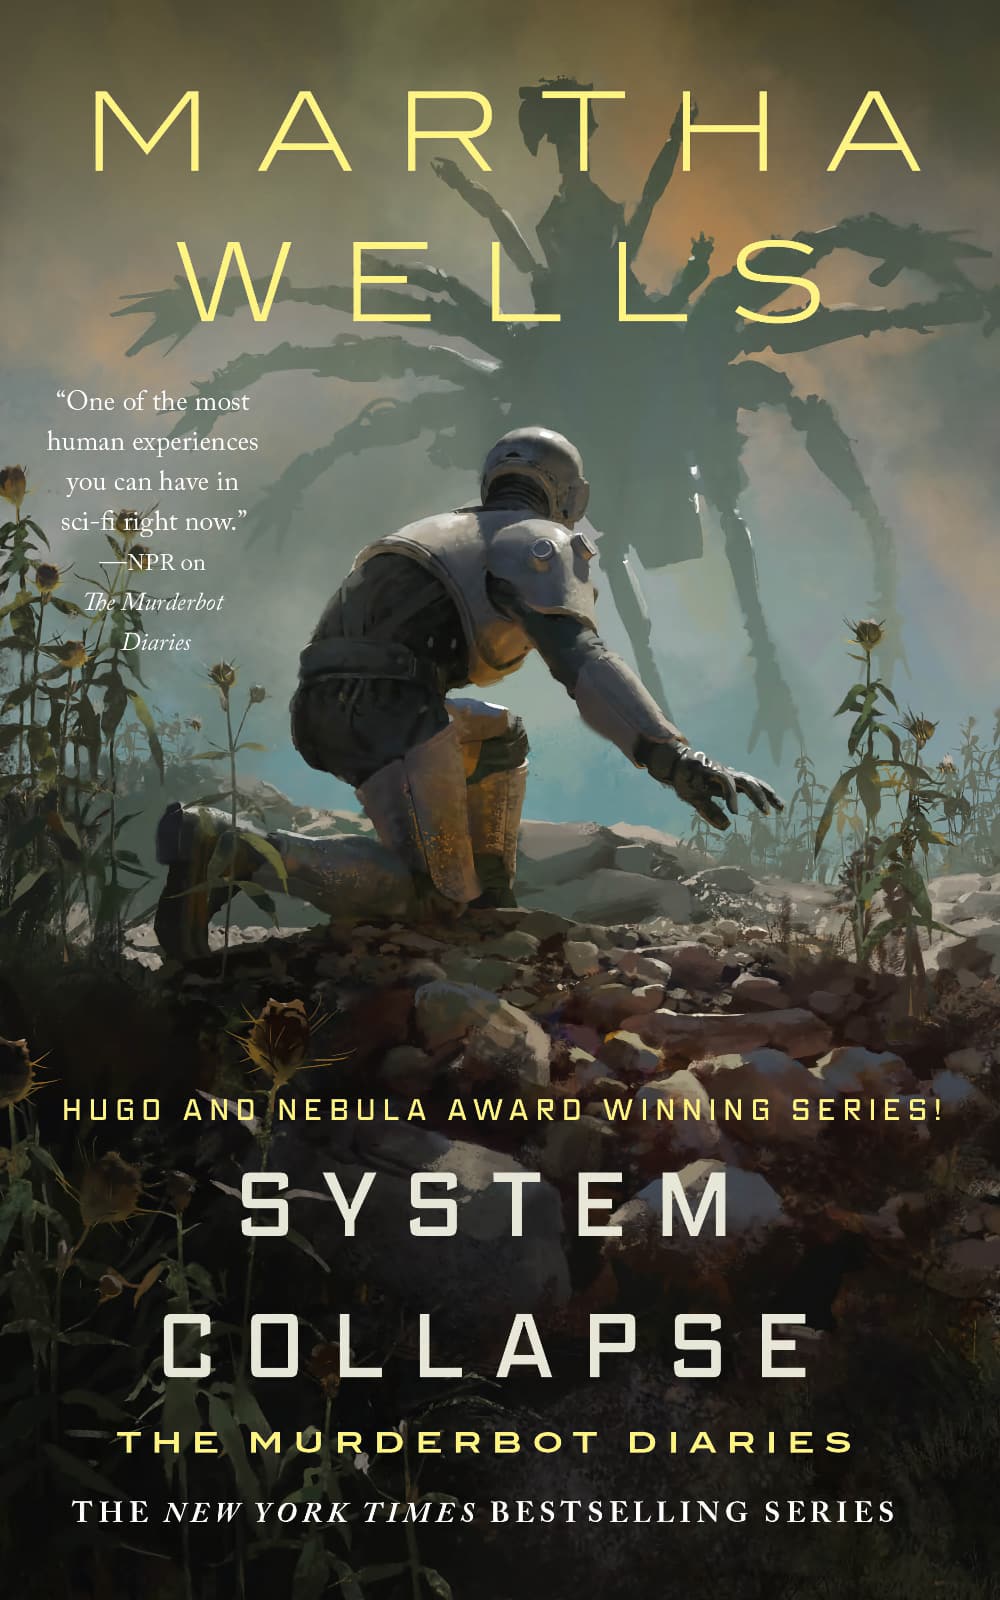 Cover art for the book System Collapse by Martha Wells. A humanoid robot crunches near a rocky field. Getting ready to face an approaching (huge!) spider-like robot.